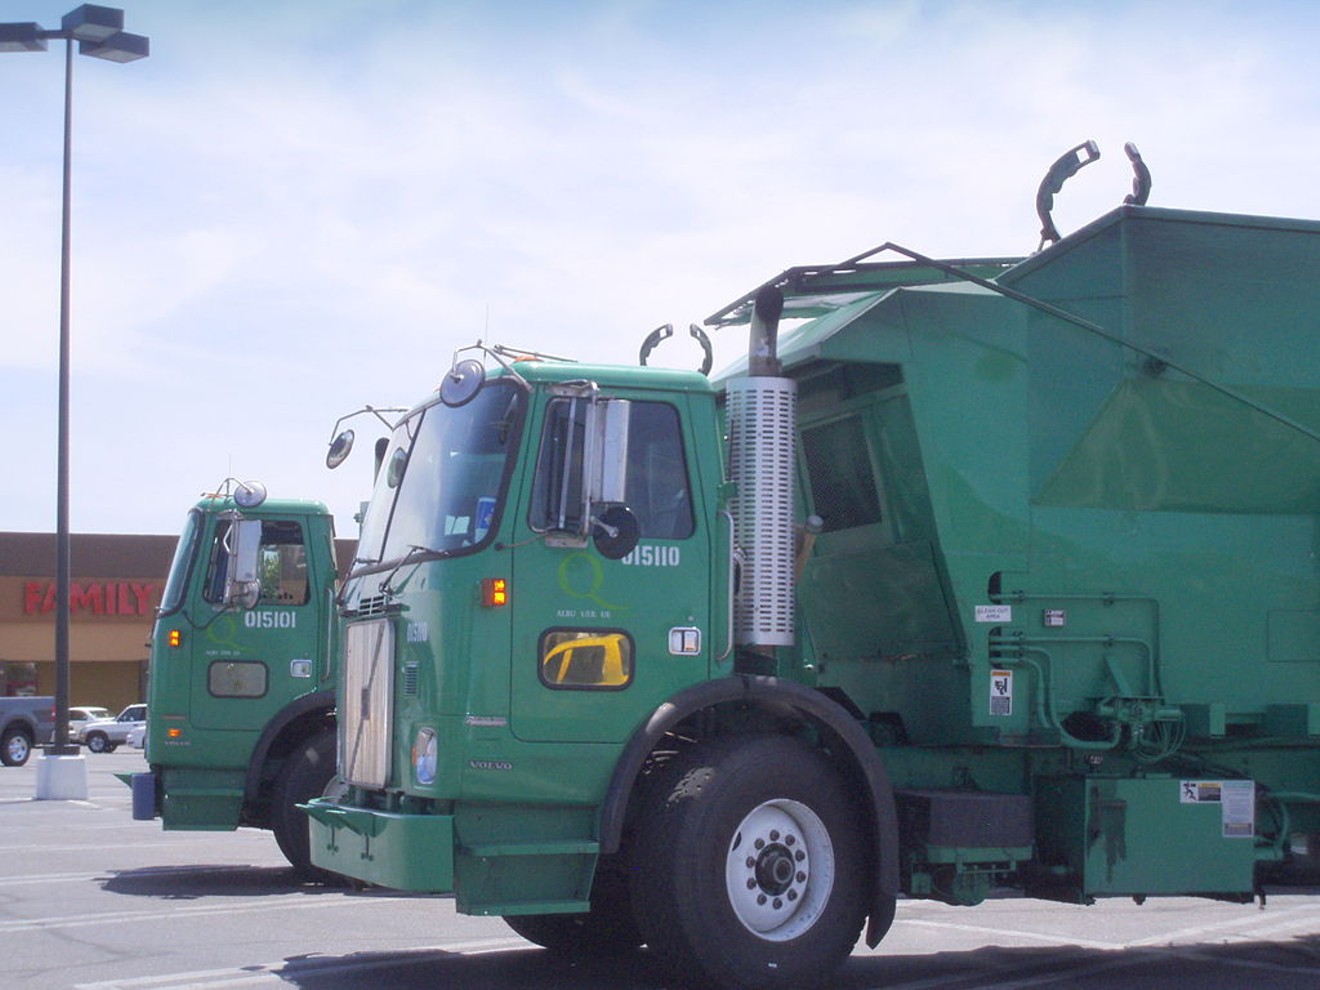 Sanitation truck drivers in Dallas don't get paid much and aren't unionized